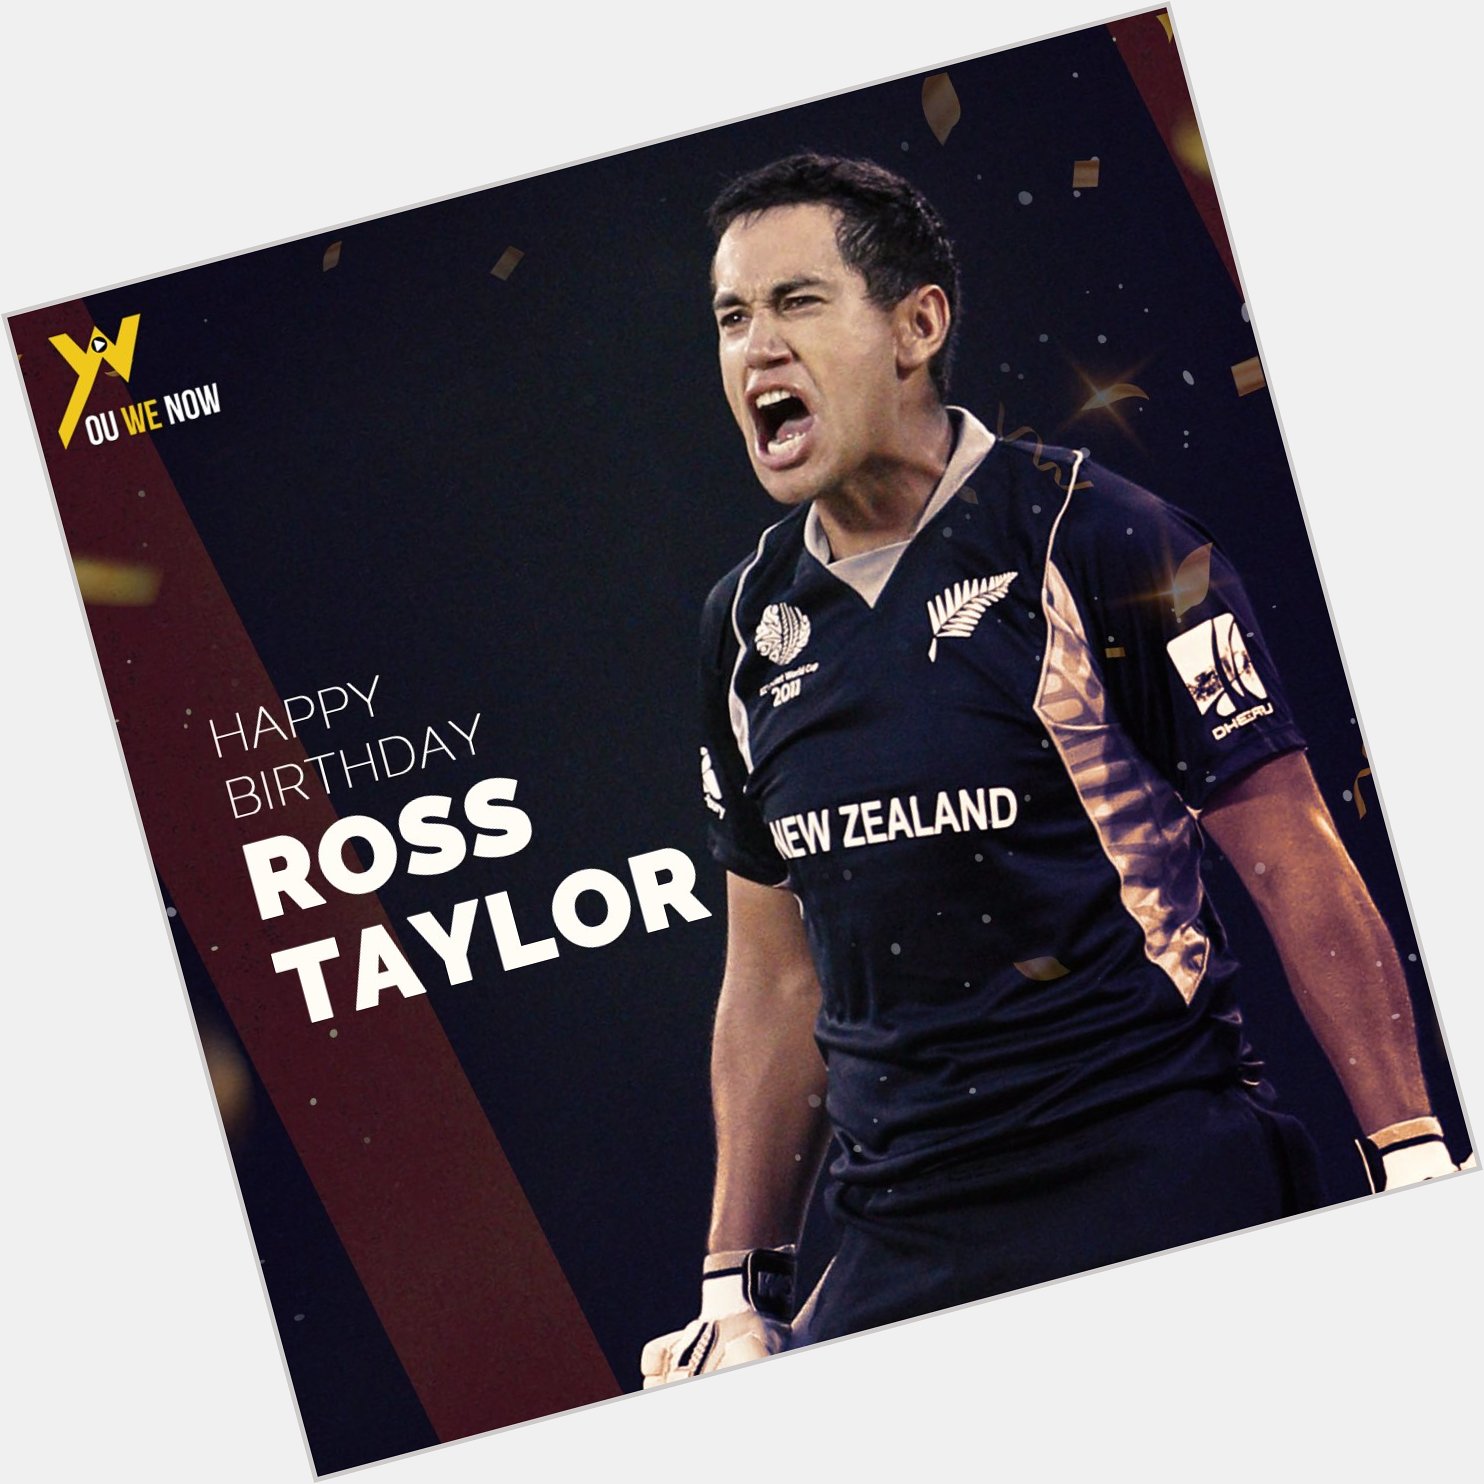 May this year bring the most wonderful things into your life, you truly deserve it. Happy Birthday Ross Taylor! 